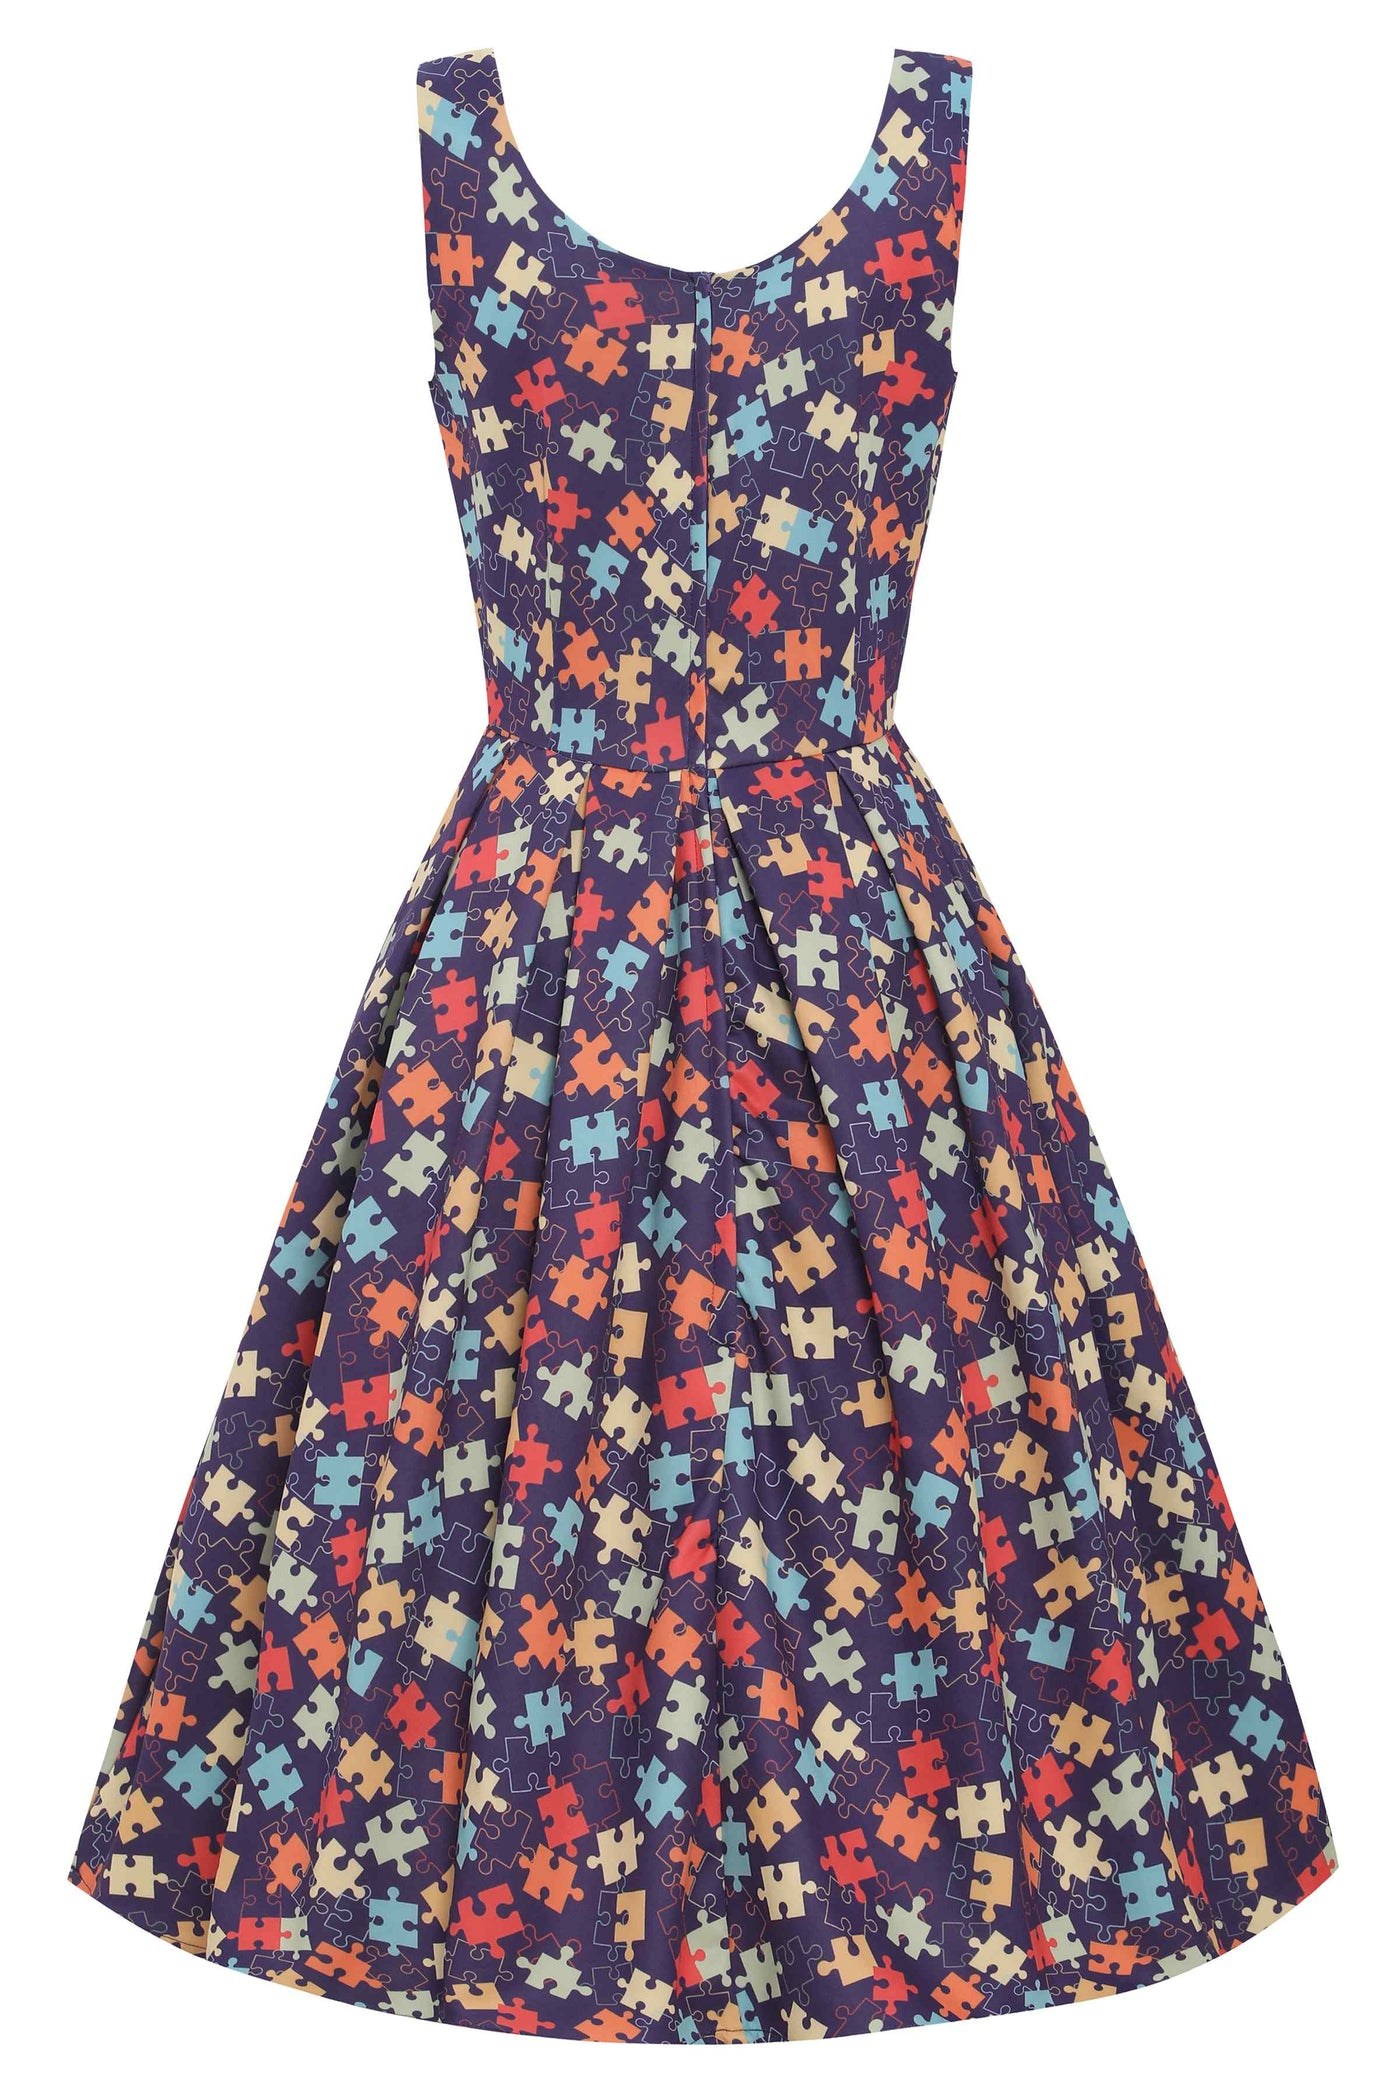 Back view of Puzzle Print Swing Dress